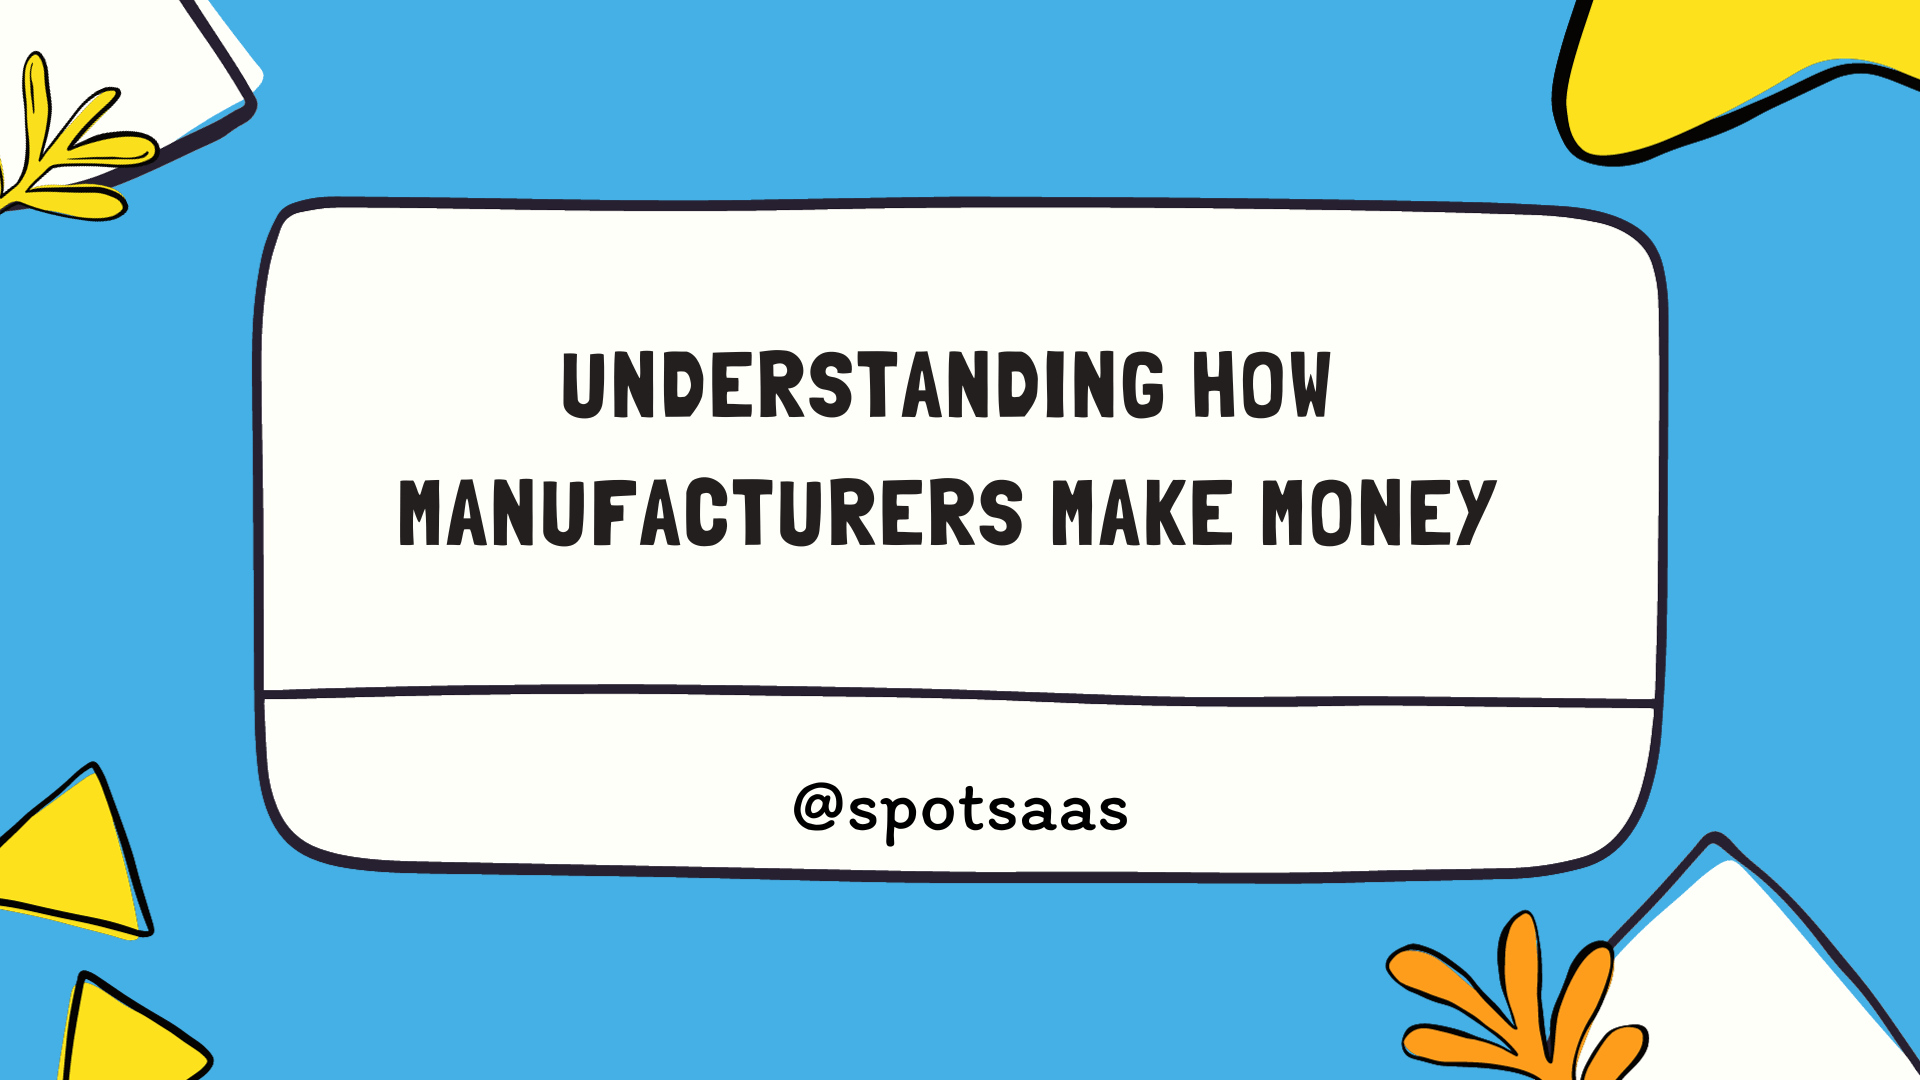 How Manufacturers Make Money